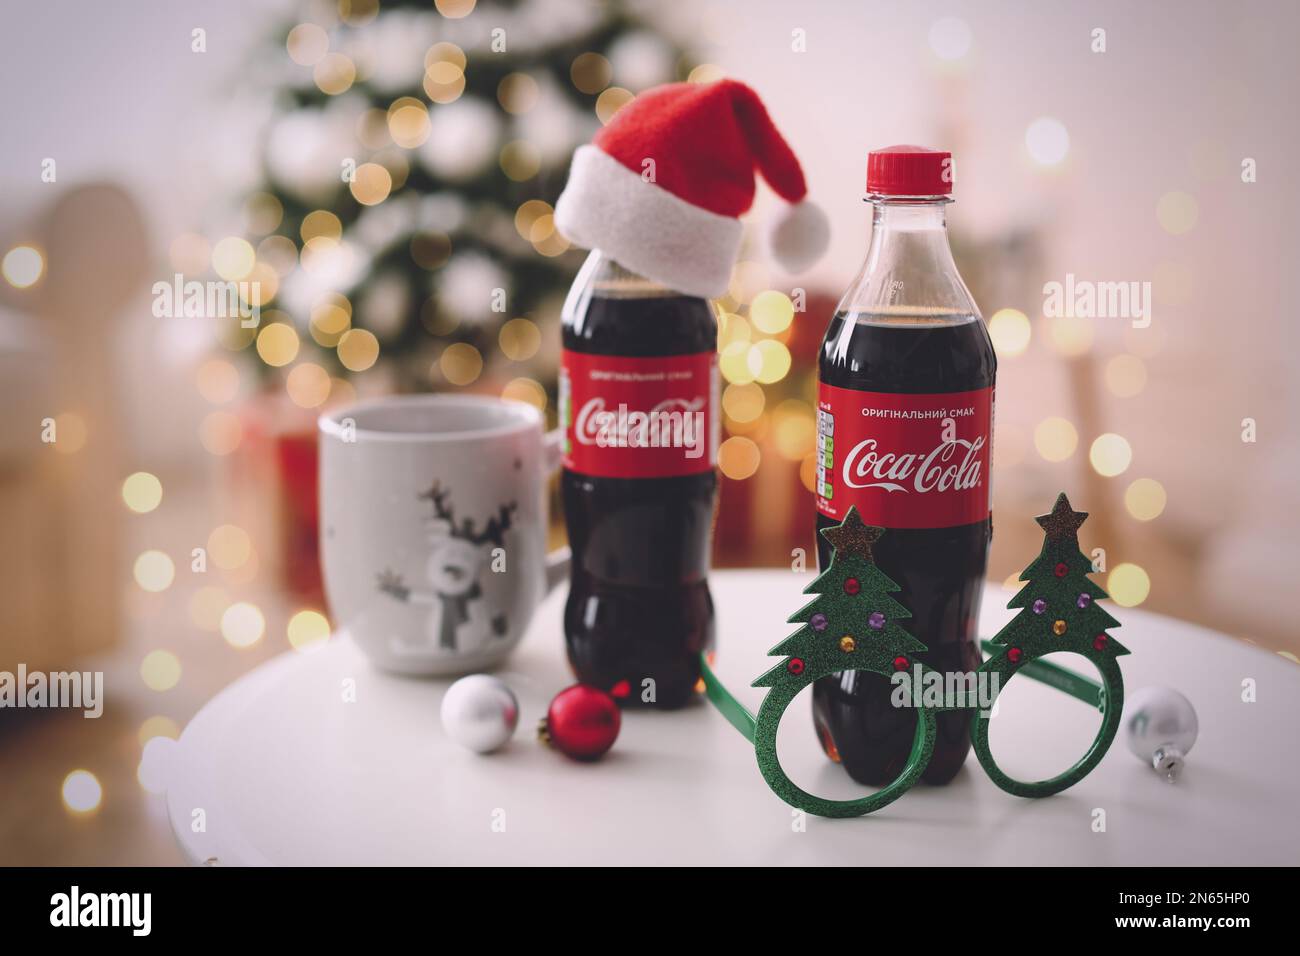 https://c8.alamy.com/comp/2N65HP0/mykolaiv-ukraine-january-01-2021-bottles-of-coca-cola-cup-and-party-glasses-on-table-against-blurred-christmas-lights-2N65HP0.jpg